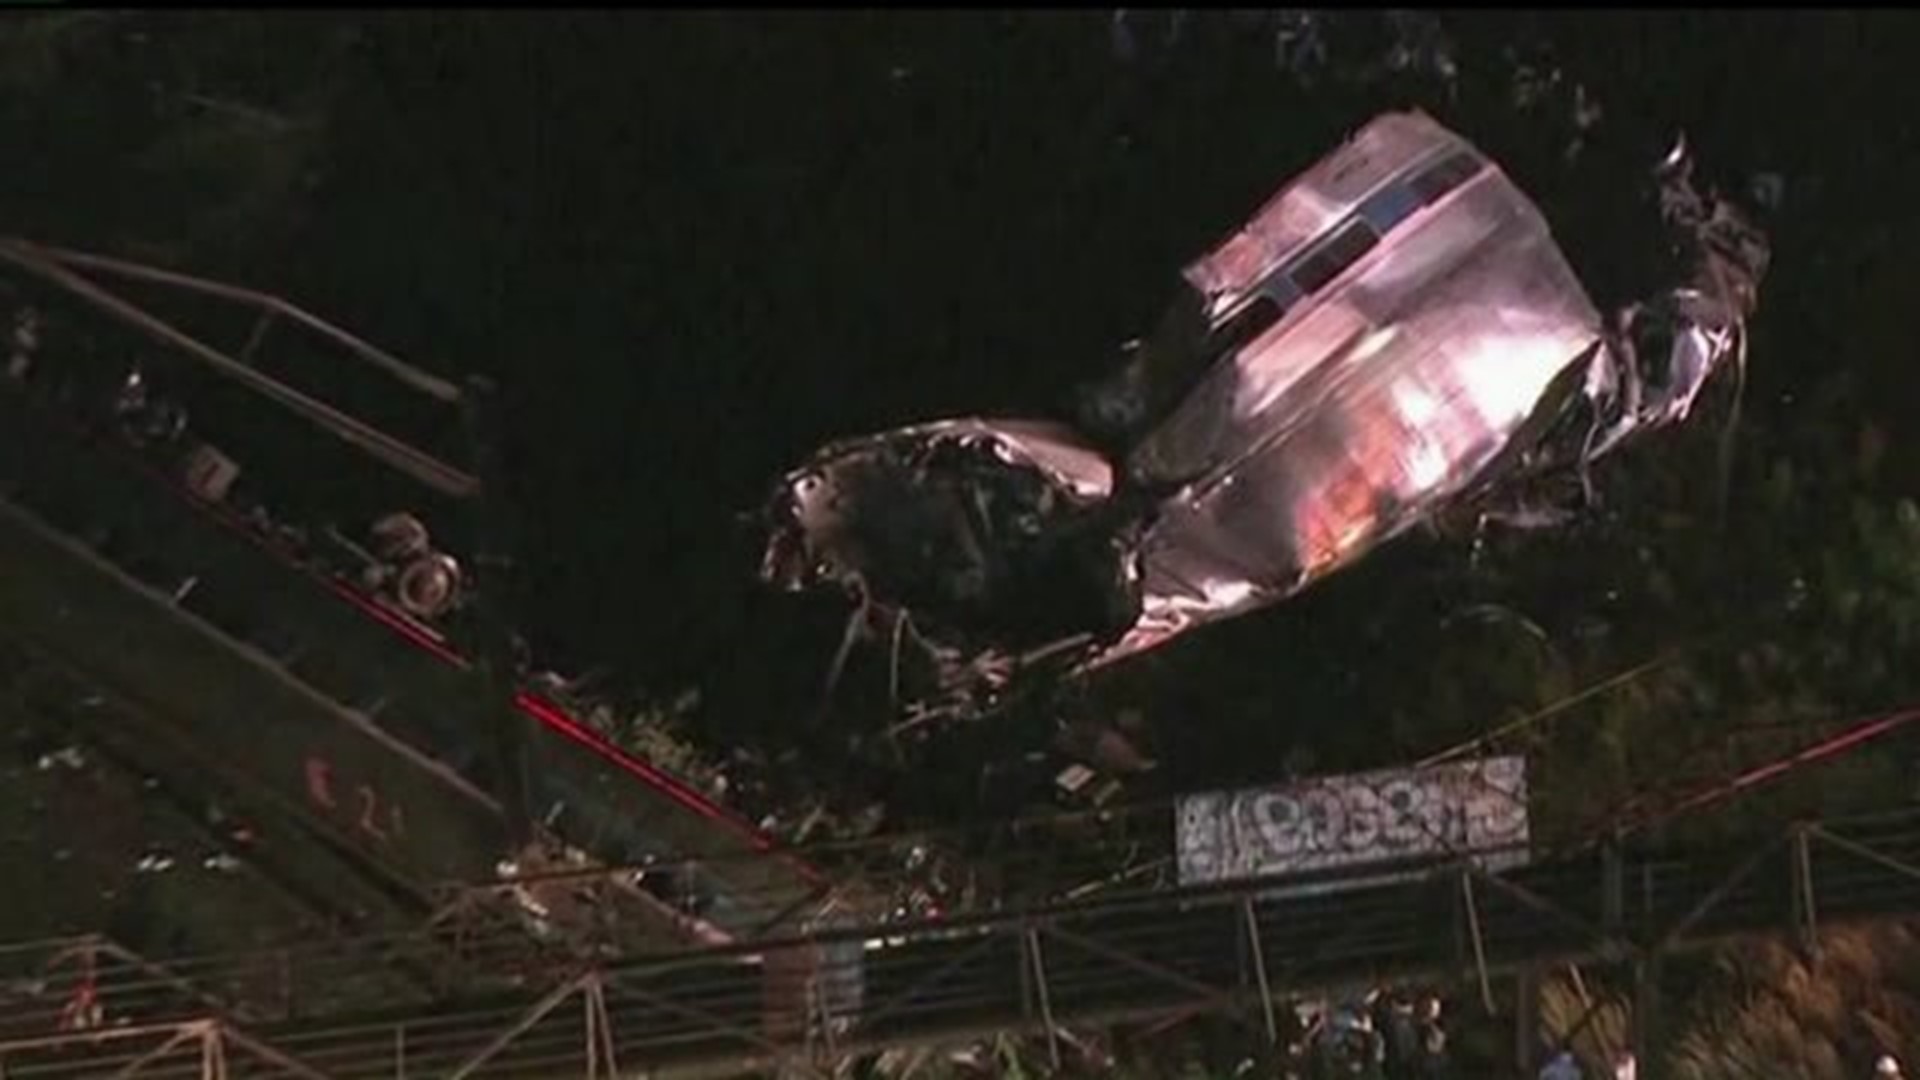 New info this morning on deadly Amtrak crash